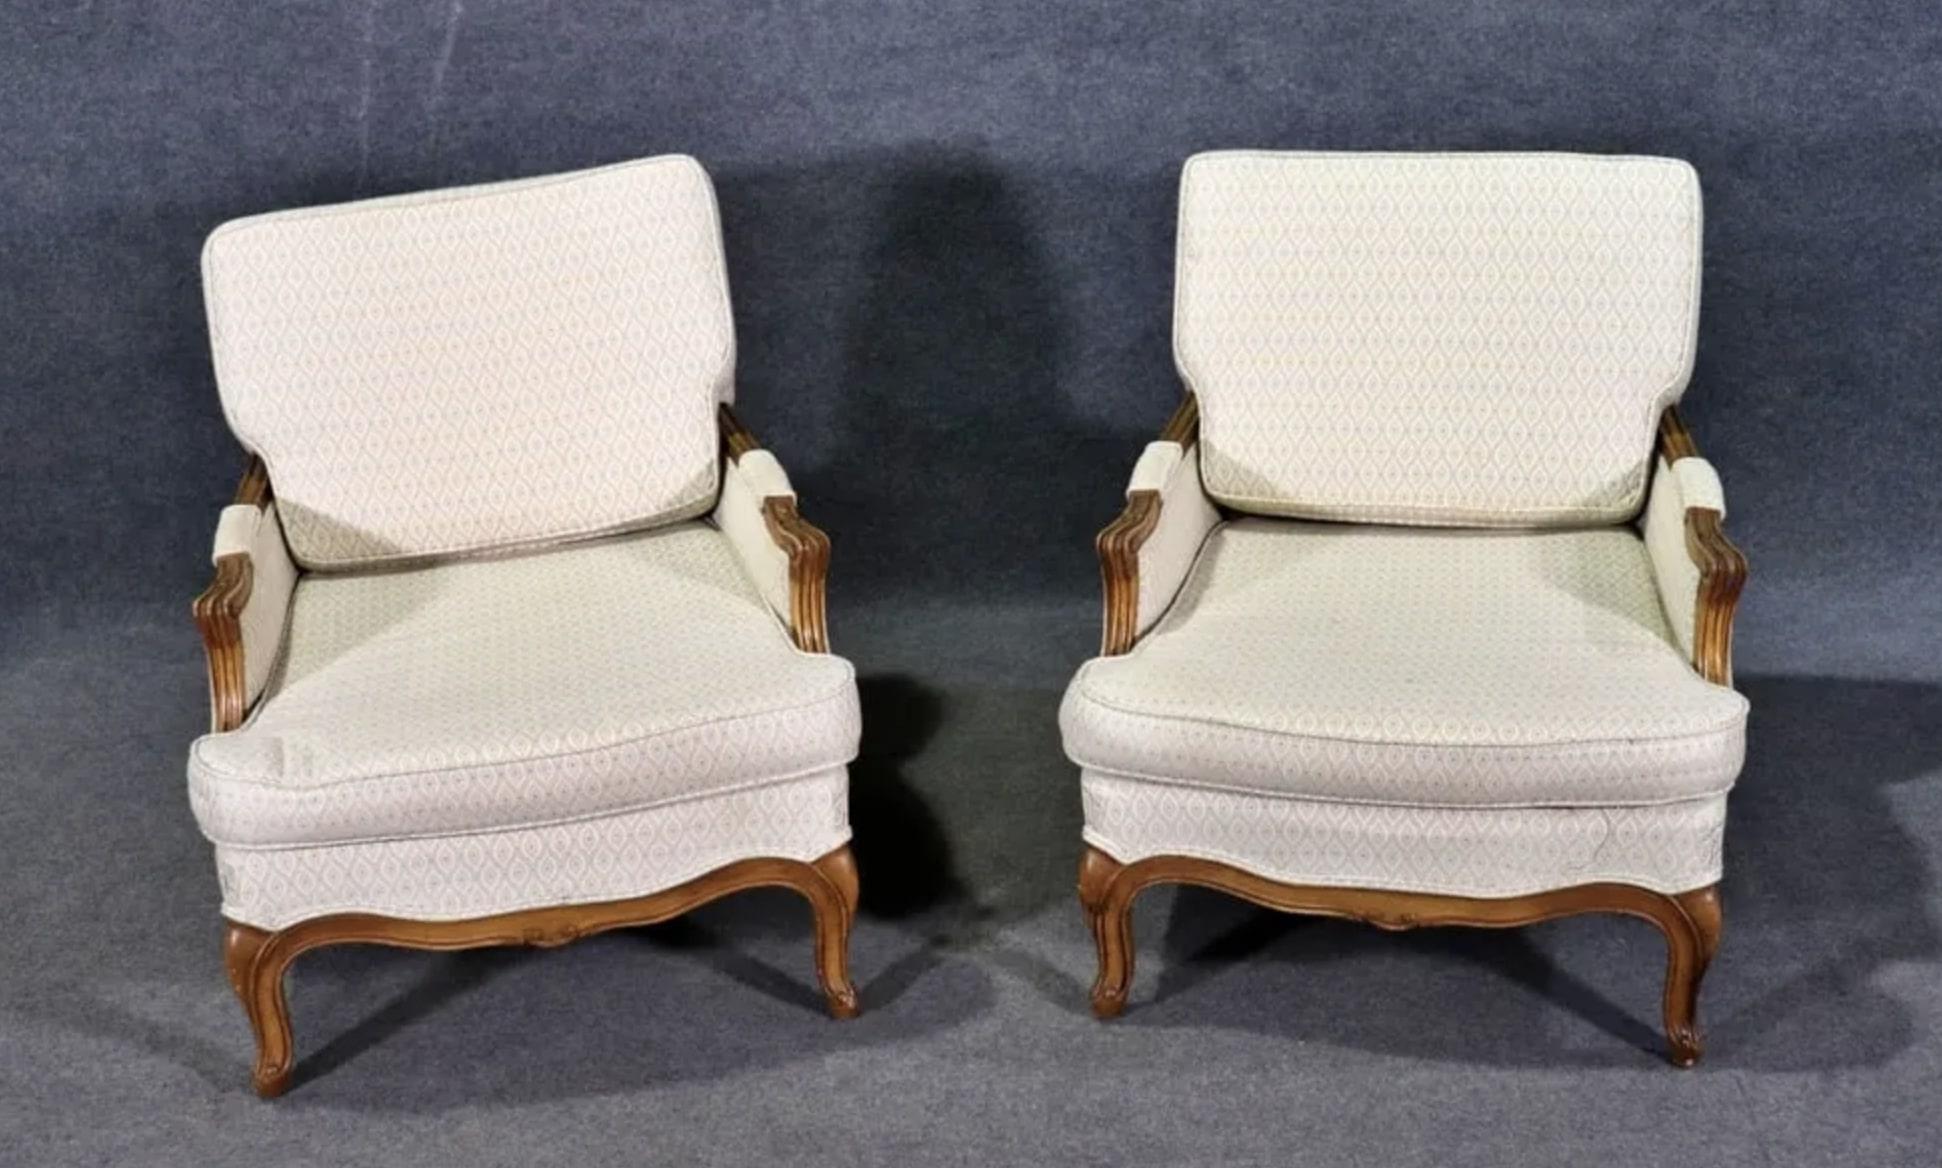 French style armchairs with deep seats and sculpted walnut frames.
Please confirm location NY or NJ